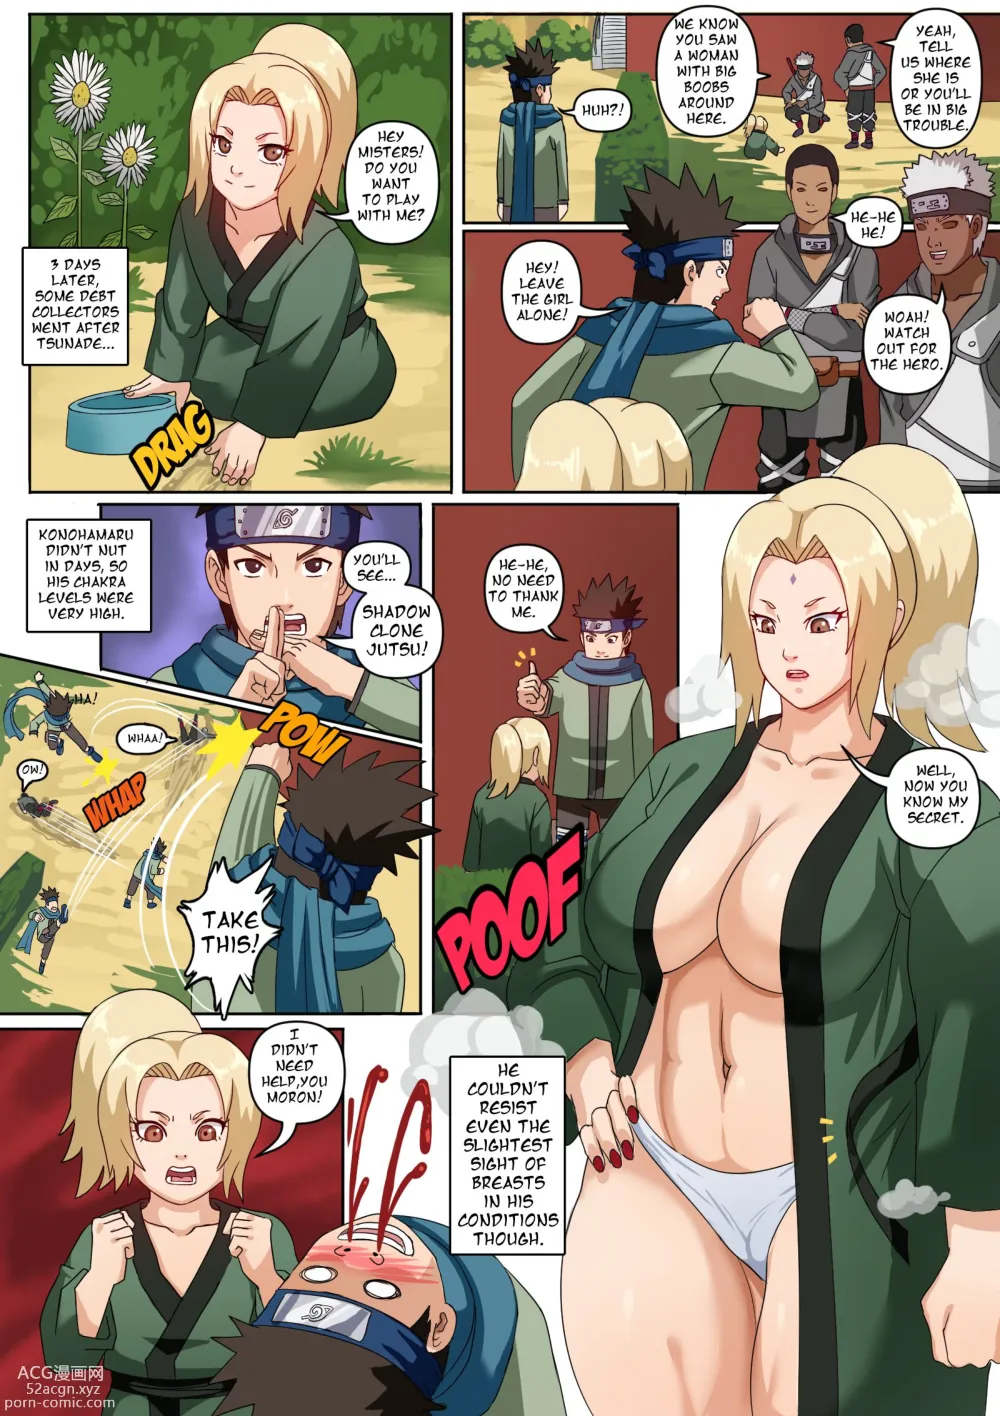 Tsunade's Special Training - Chapter 1 (Naruto) - Western Porn Comics  Western Adult Comix (Page 4)